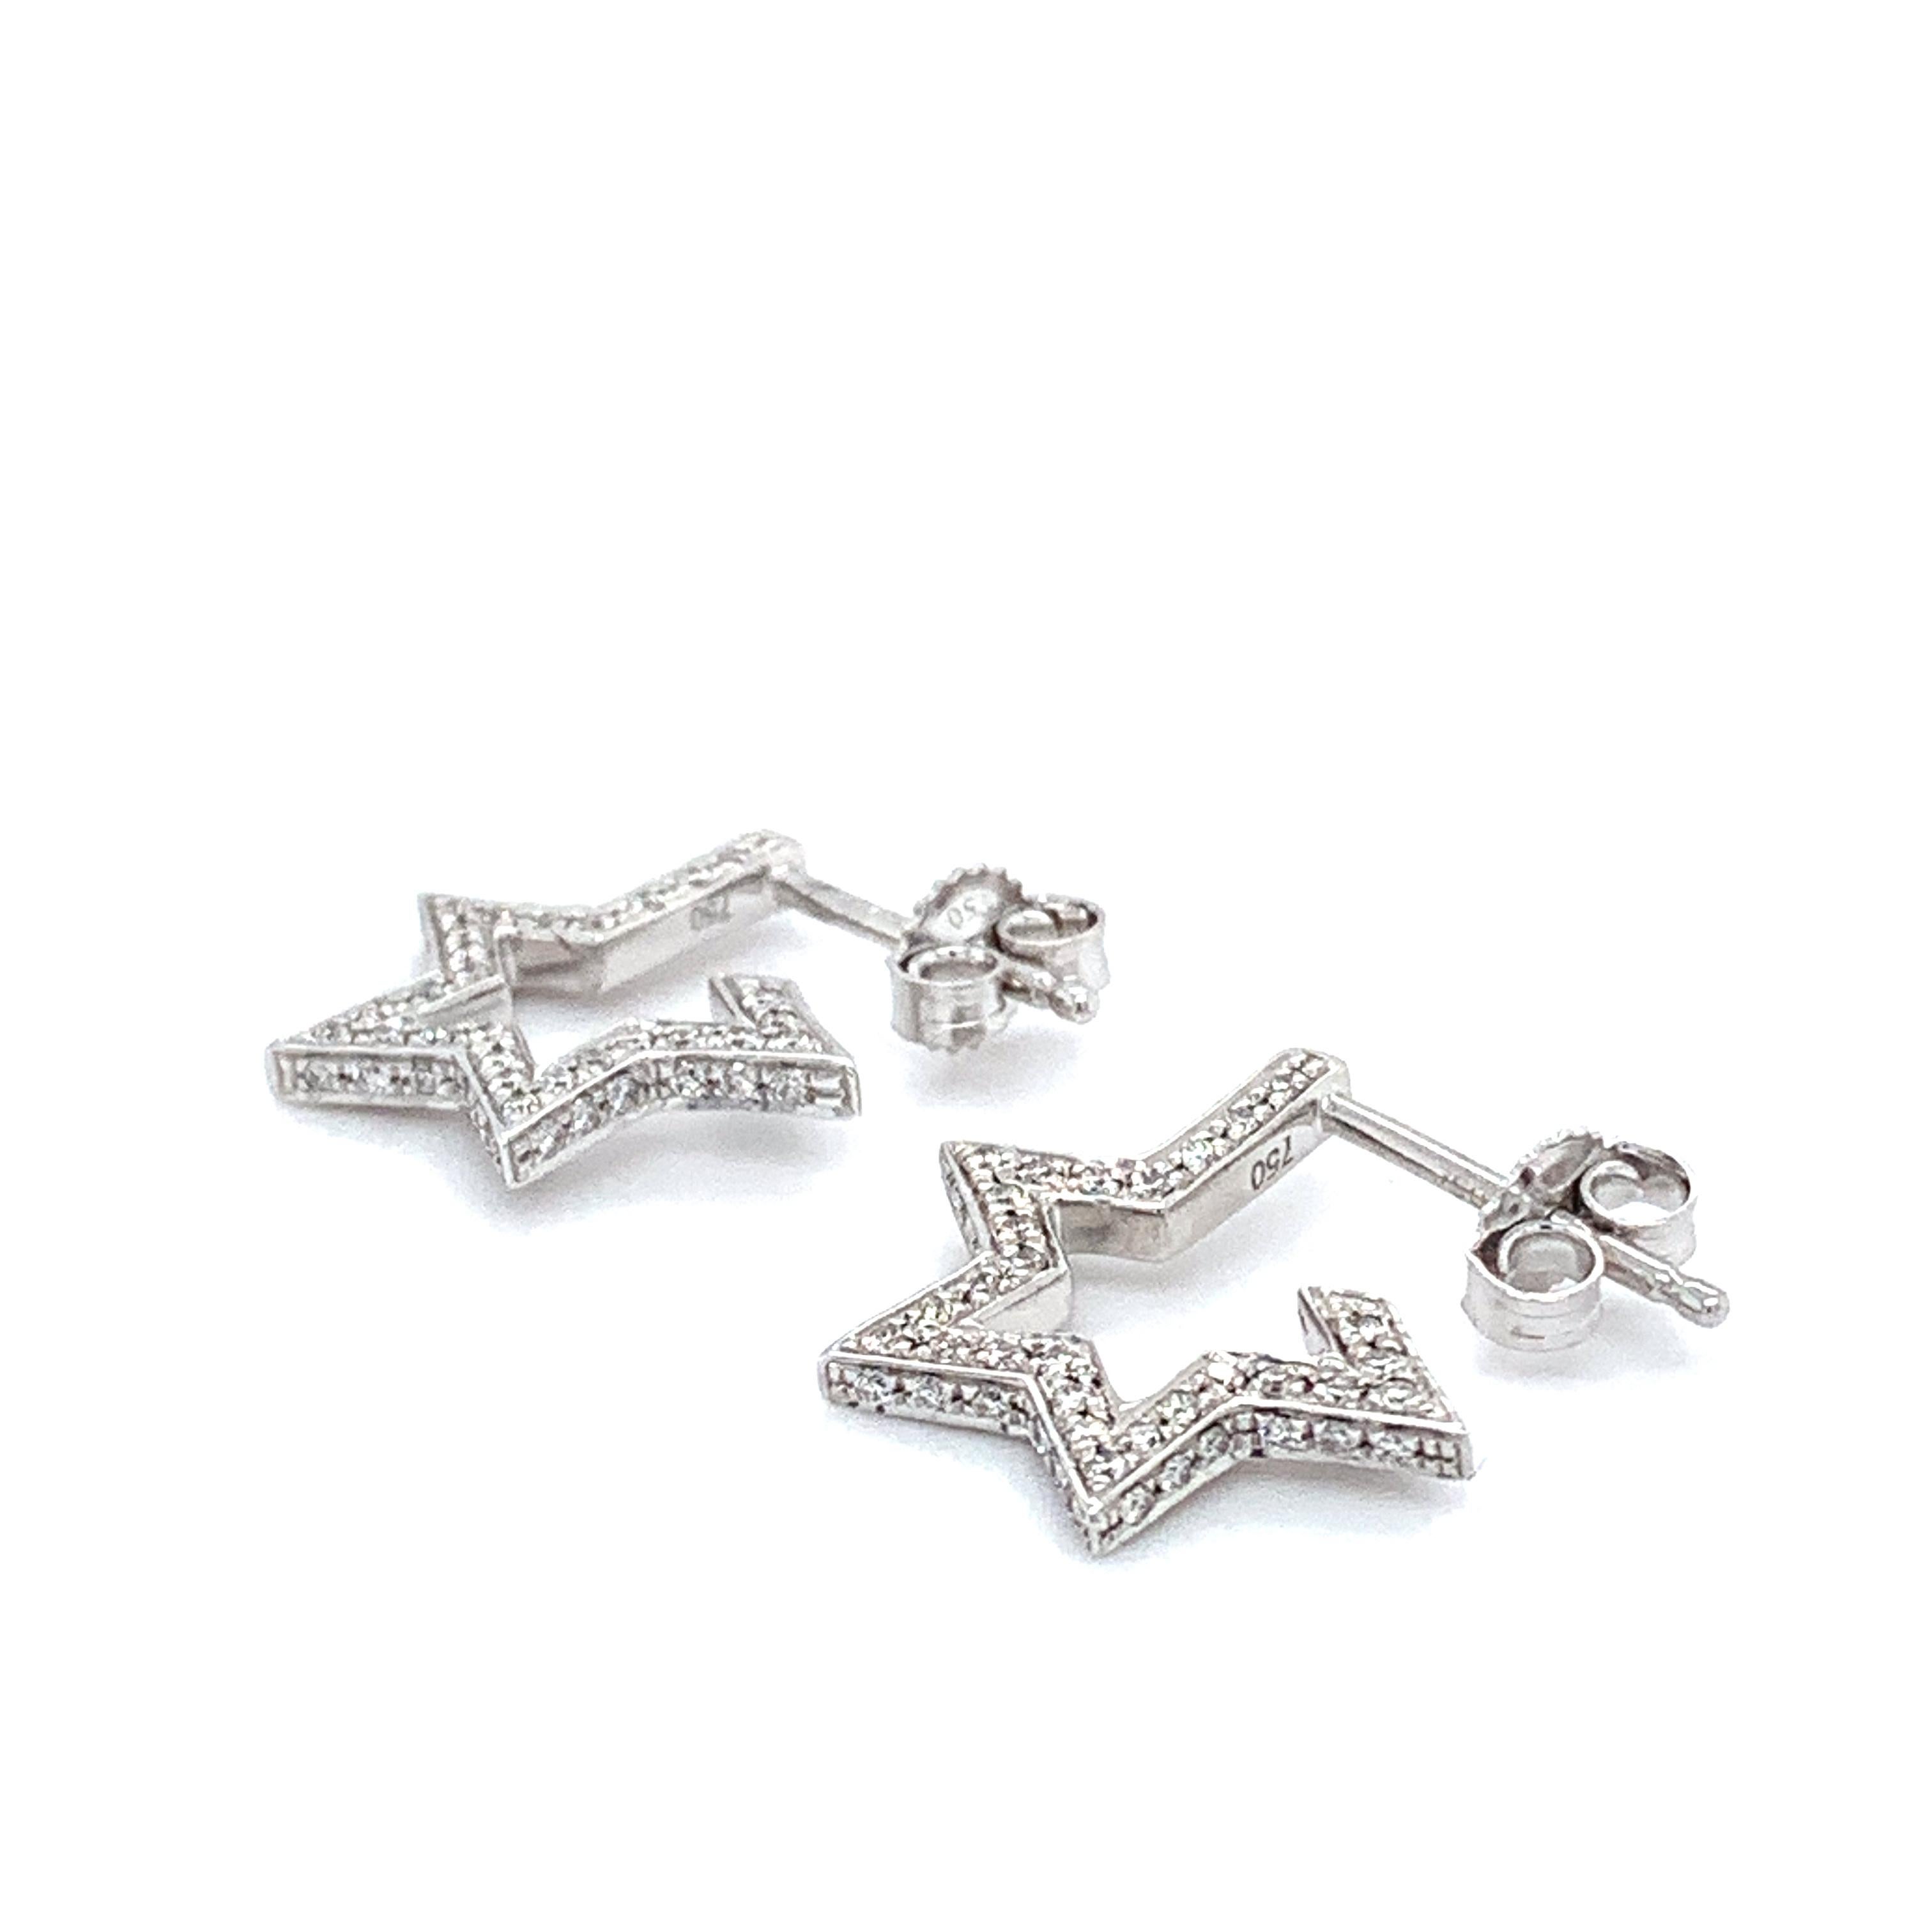 0.46ct Round diamond cut pave setting star stud earrings 18k white gold
Art deco style earrings in 18k white gold
Composed of round diamond studs earrings 18k white gold total diamond weight 0.46ct F colour VS1 clarity
Weight 2.6